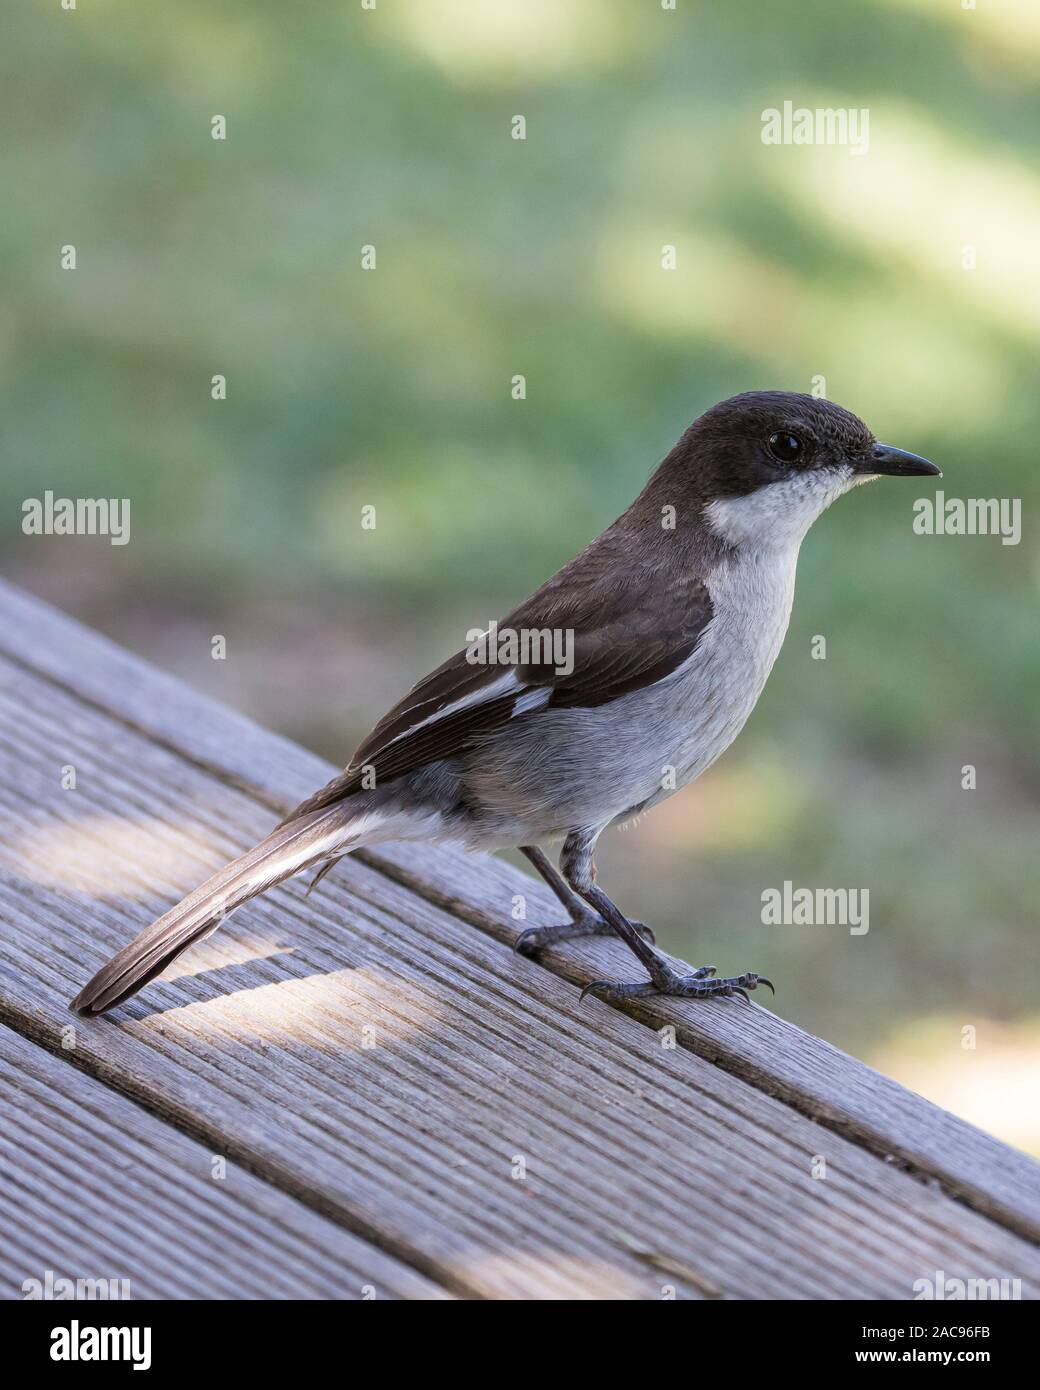 Fiscal Flycatcher (Sigelus silens) perched on wooden deck in close up profile view Stock Photo